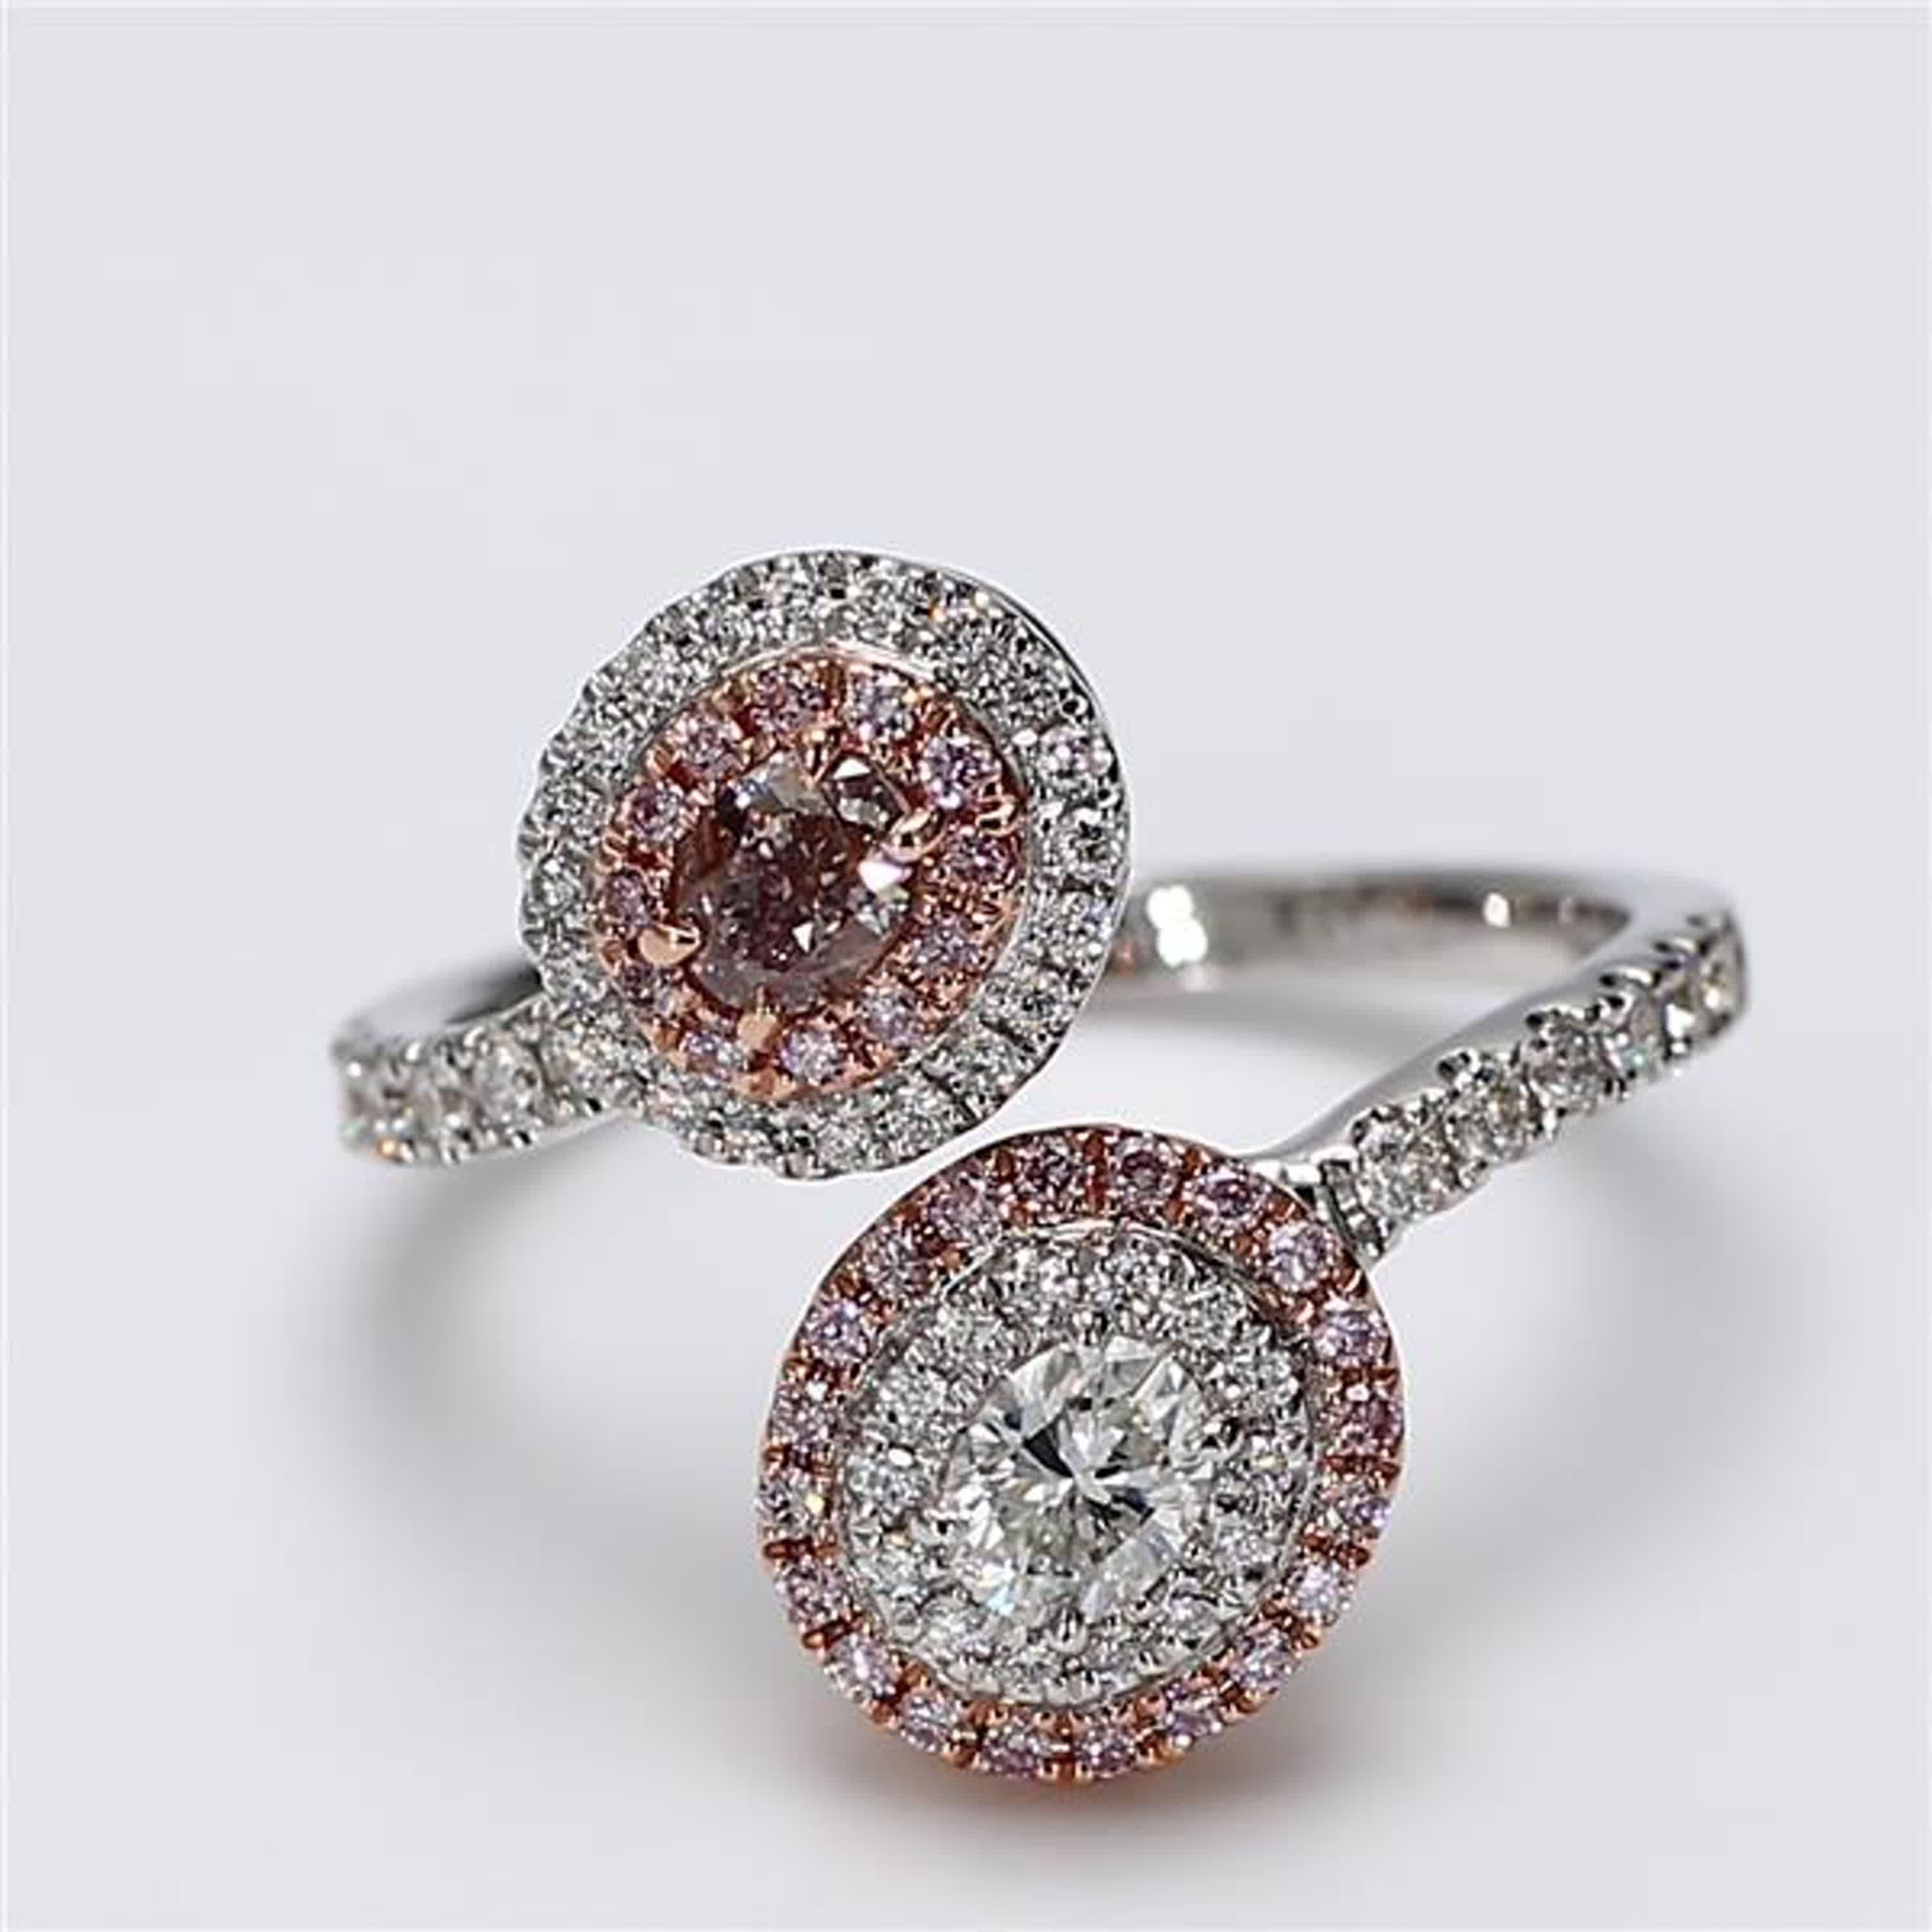 RareGemWorld's classic GIA certified diamond ring. Mounted in a beautiful 18K Rose and White Gold setting with a natural oval cut pink diamond as well as a natural oval cut white diamond. The oval diamonds are surrounded by round natural pink